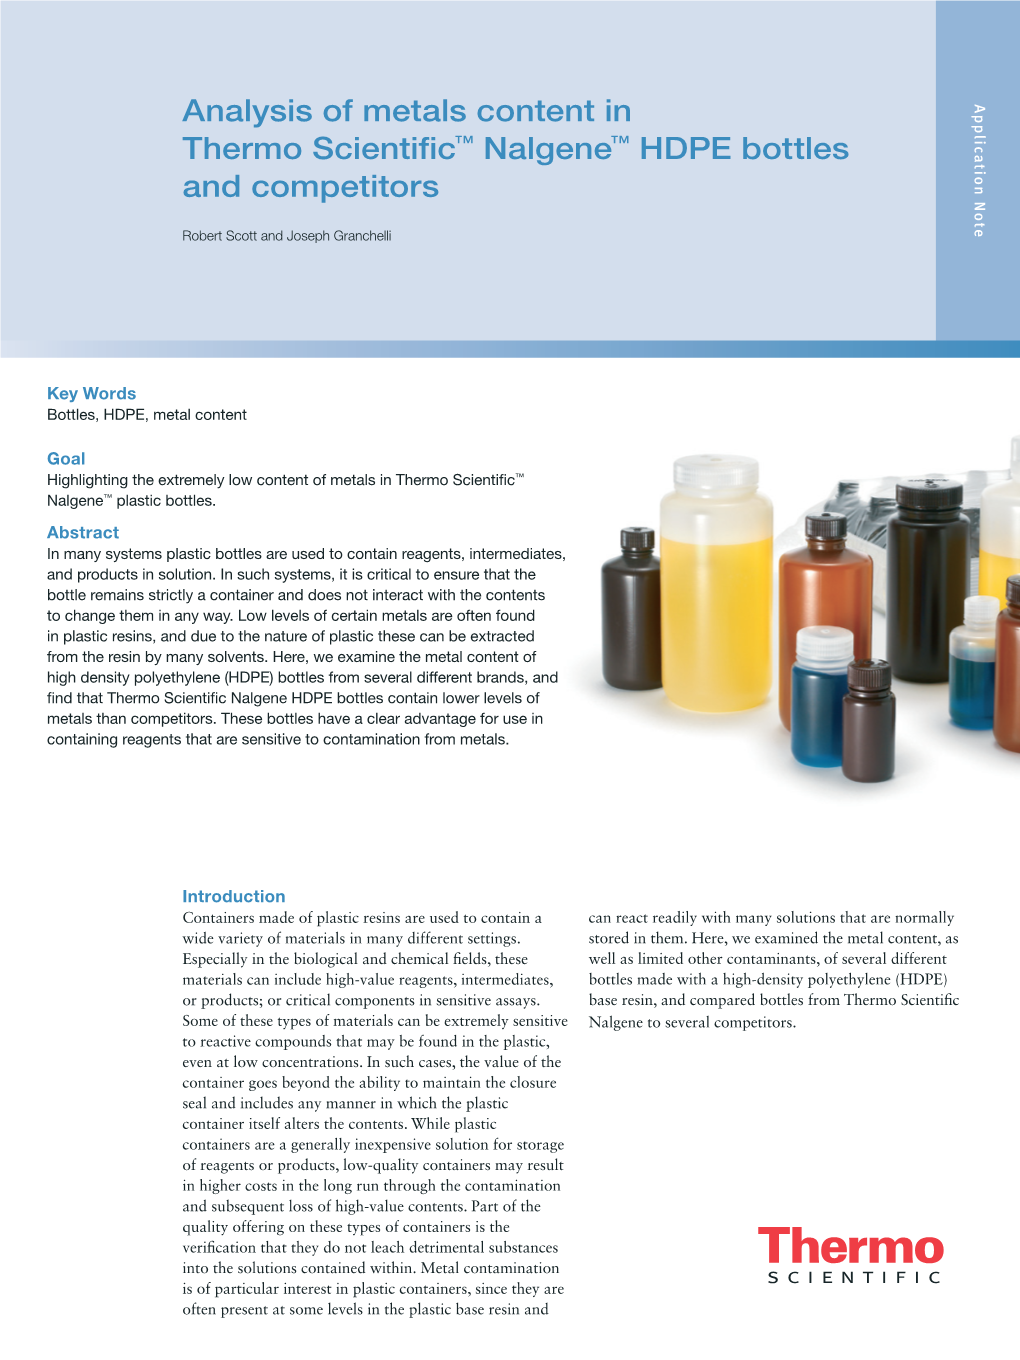 Analysis of Metals Content in Thermo Scientific™ Nalgene™ HDPE